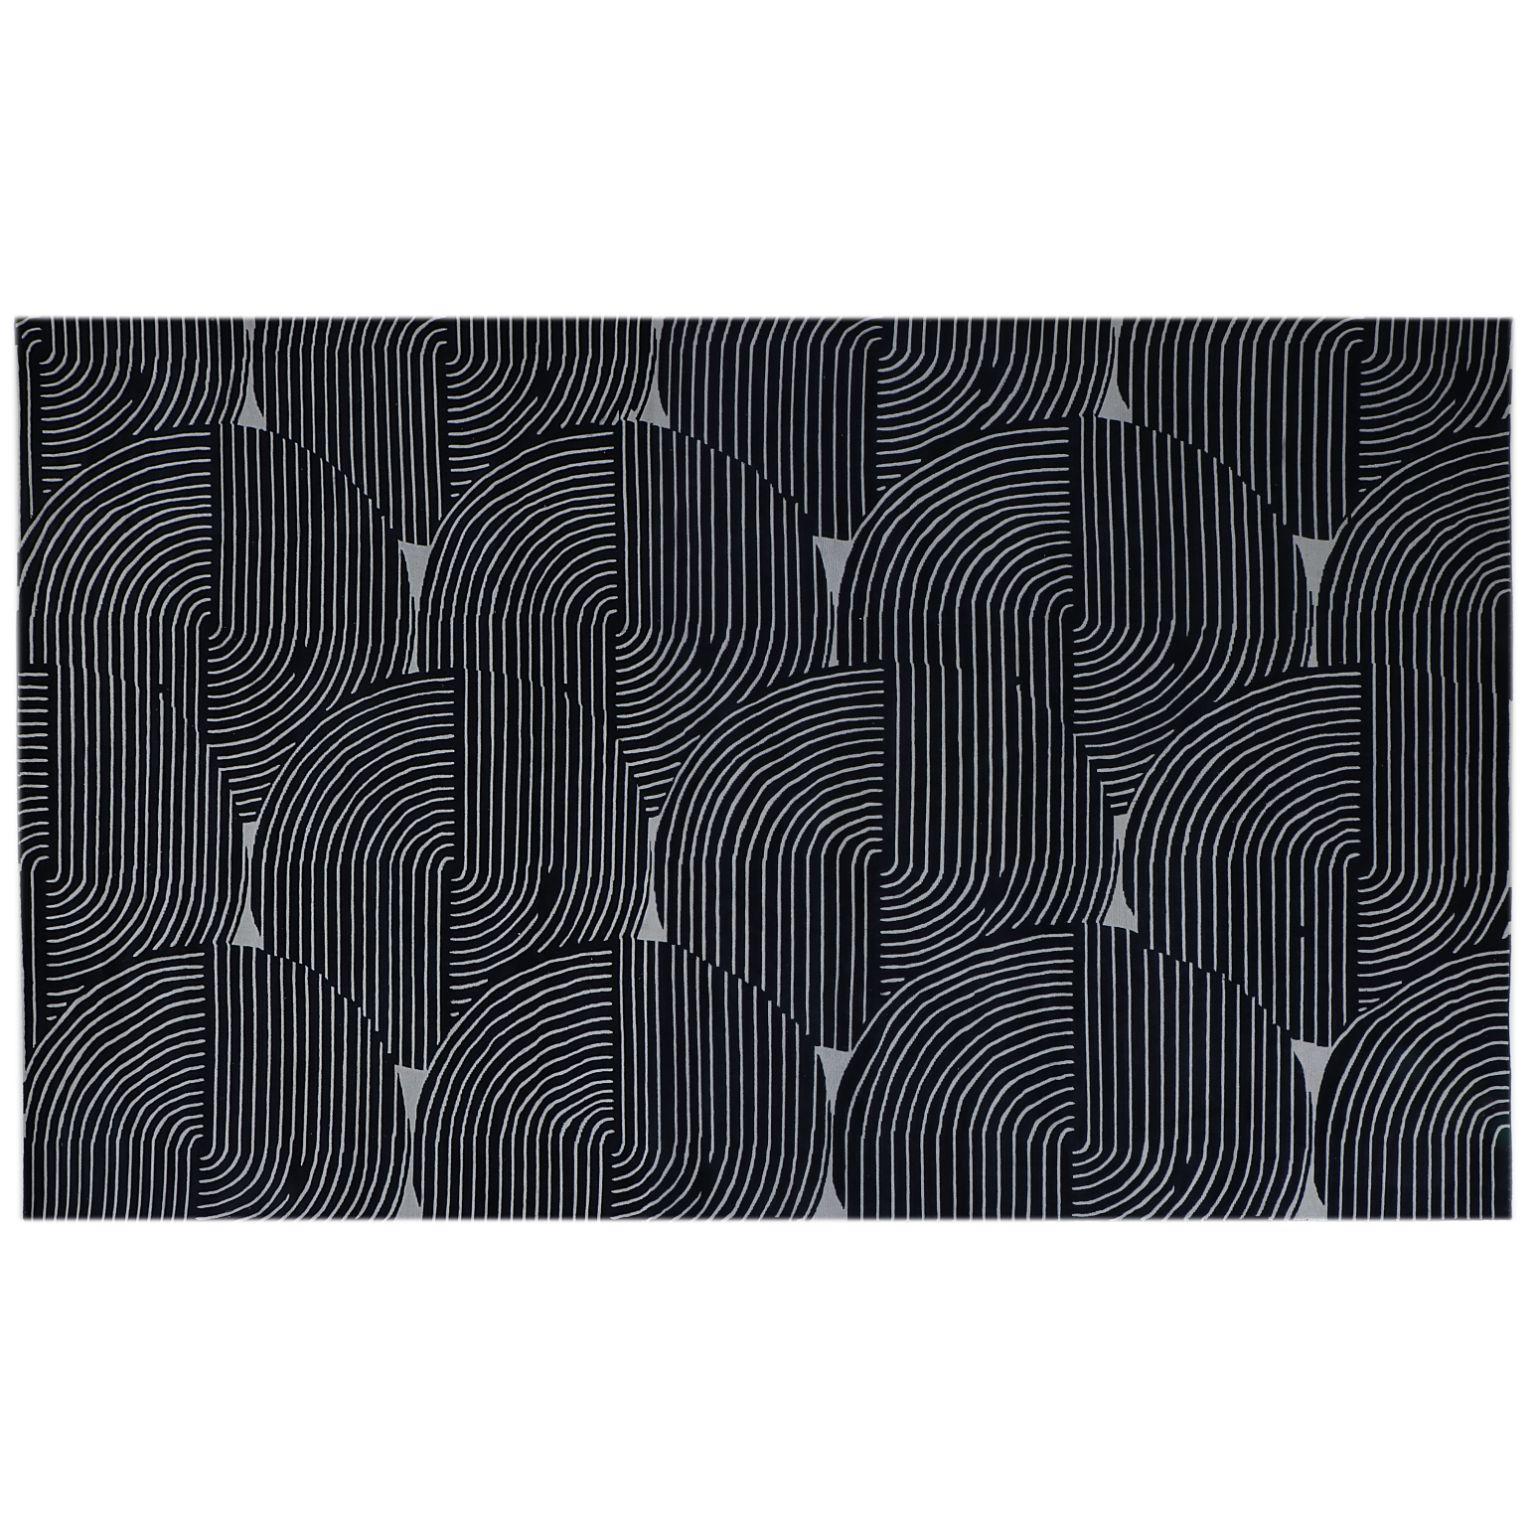 Nightcap medium rug by Art & Loom
Dimensions: D274.3 x H365.8 cm
Materials: New Zealand wool & Chinese silk
Quality (Knots per Inch): 100
Also available in different dimensions.

Samantha Gallacher has always had a keen eye for aesthetics, drawing